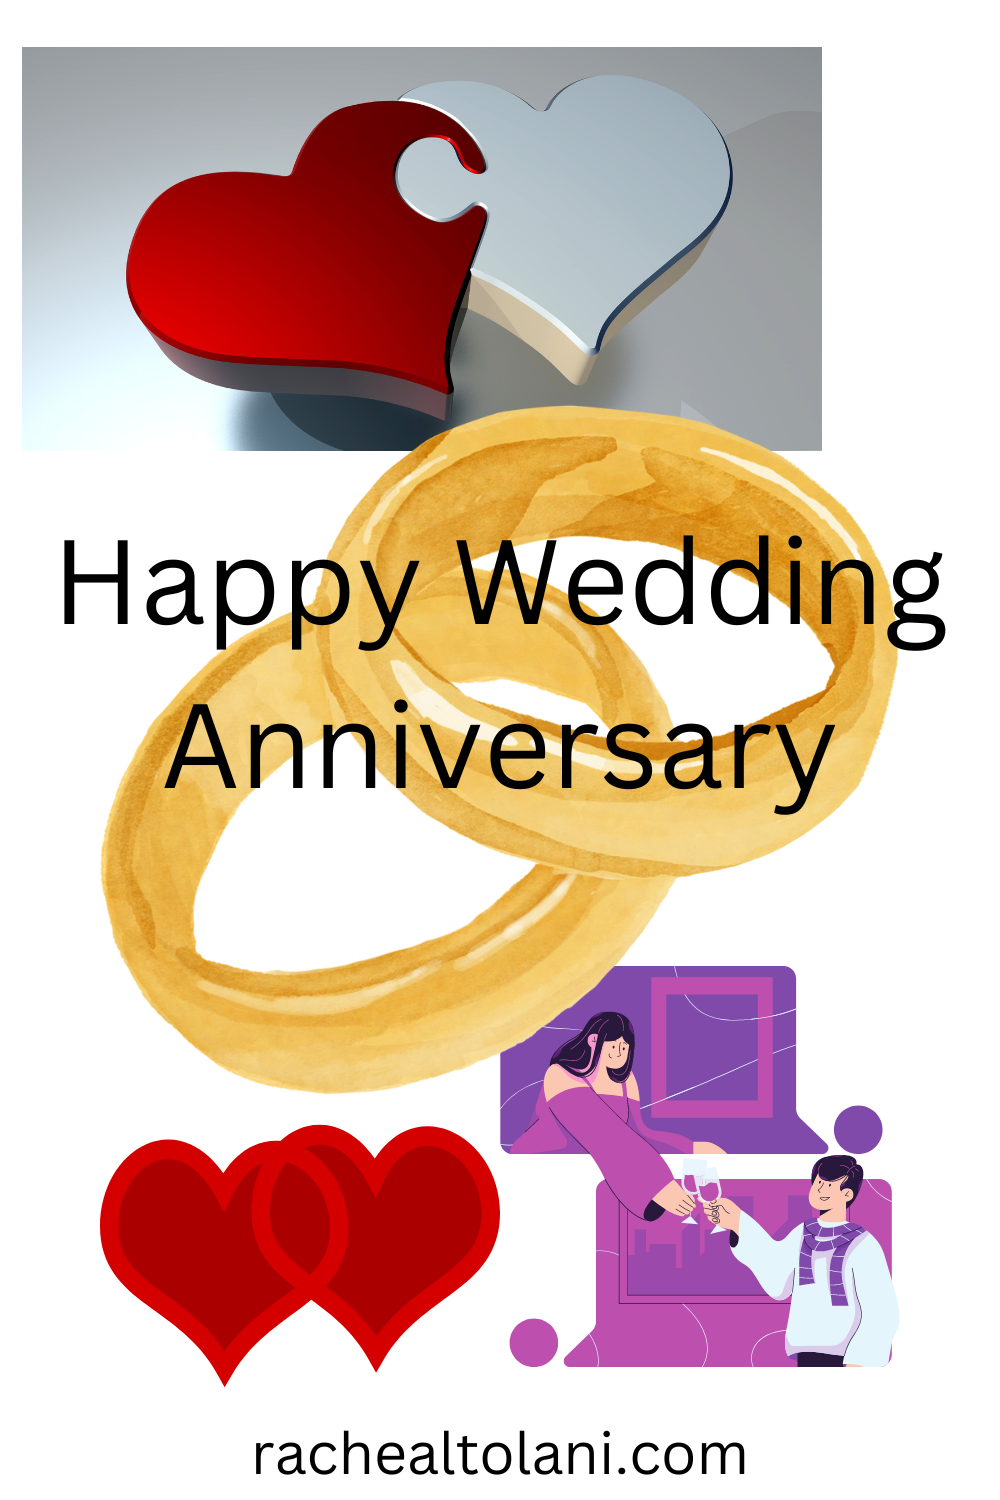 Happy Wedding Anniversary Wishes And Greetings To Couples -